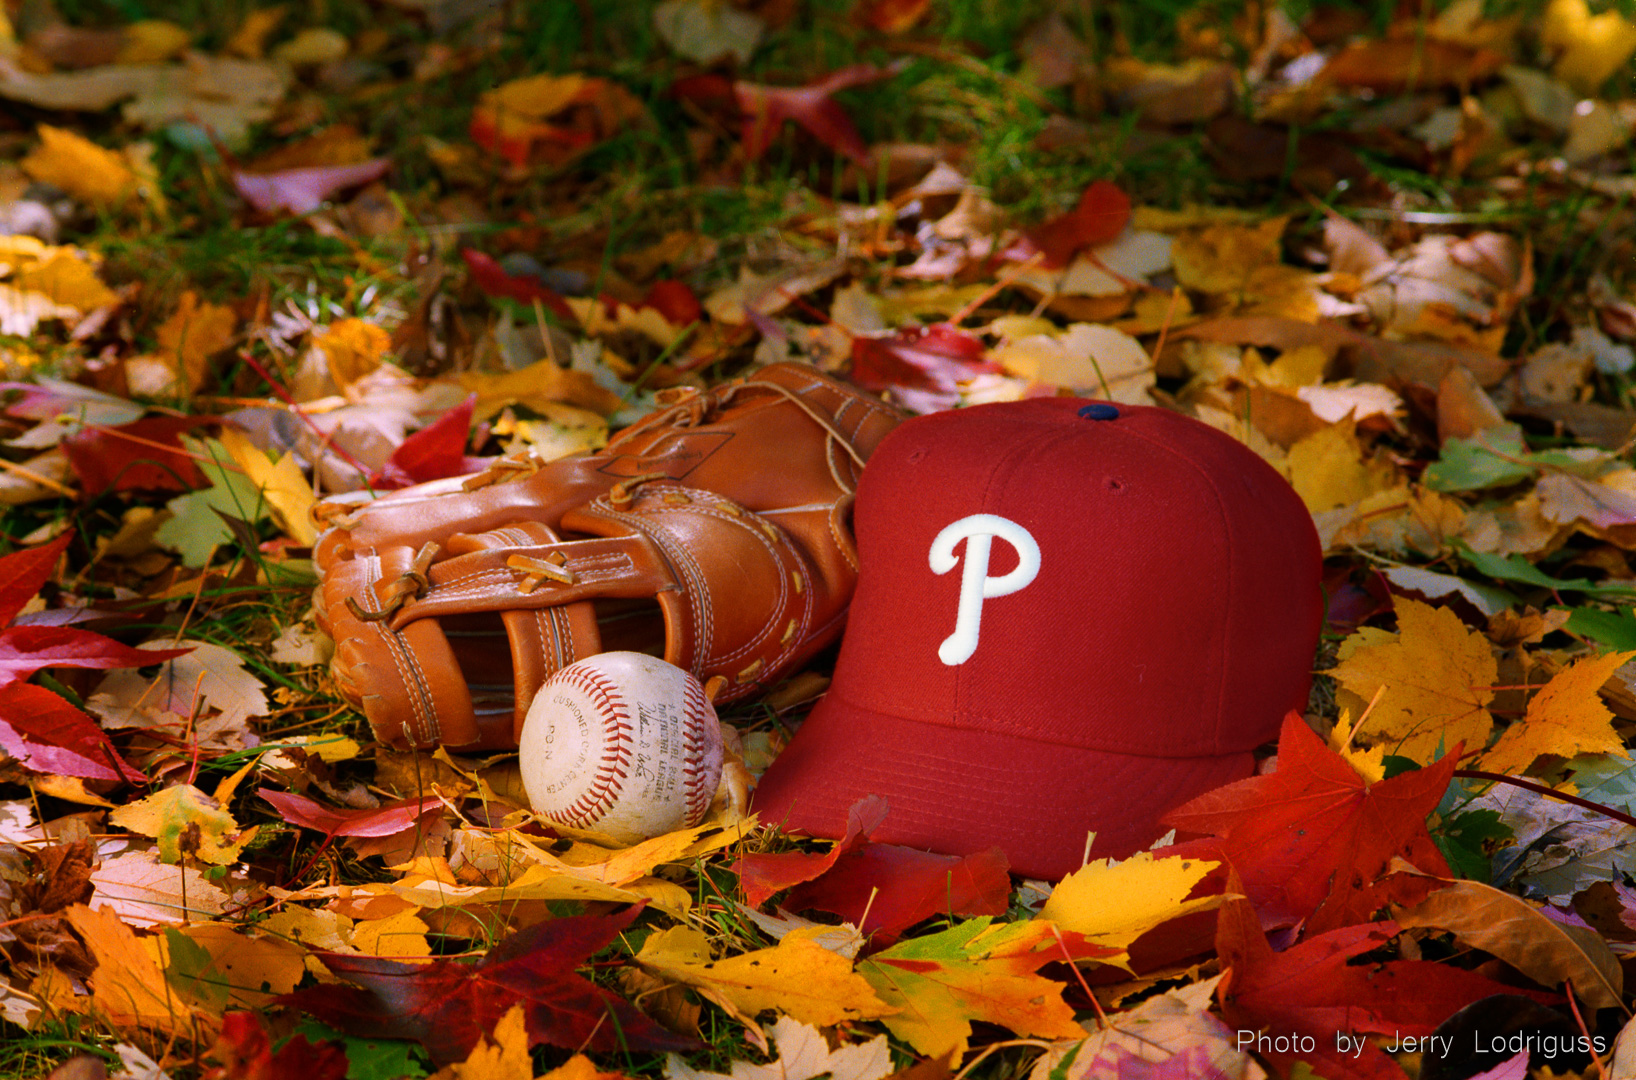 A Phillies hat, glove and ball sit among the fallen leaves of autumn in 1993, a year the team won 97 games, went from last place to first place, captured the National League Pennant, and made a trip to the World Series where they faced the Toronto Blue Jays in the Fall Classic.